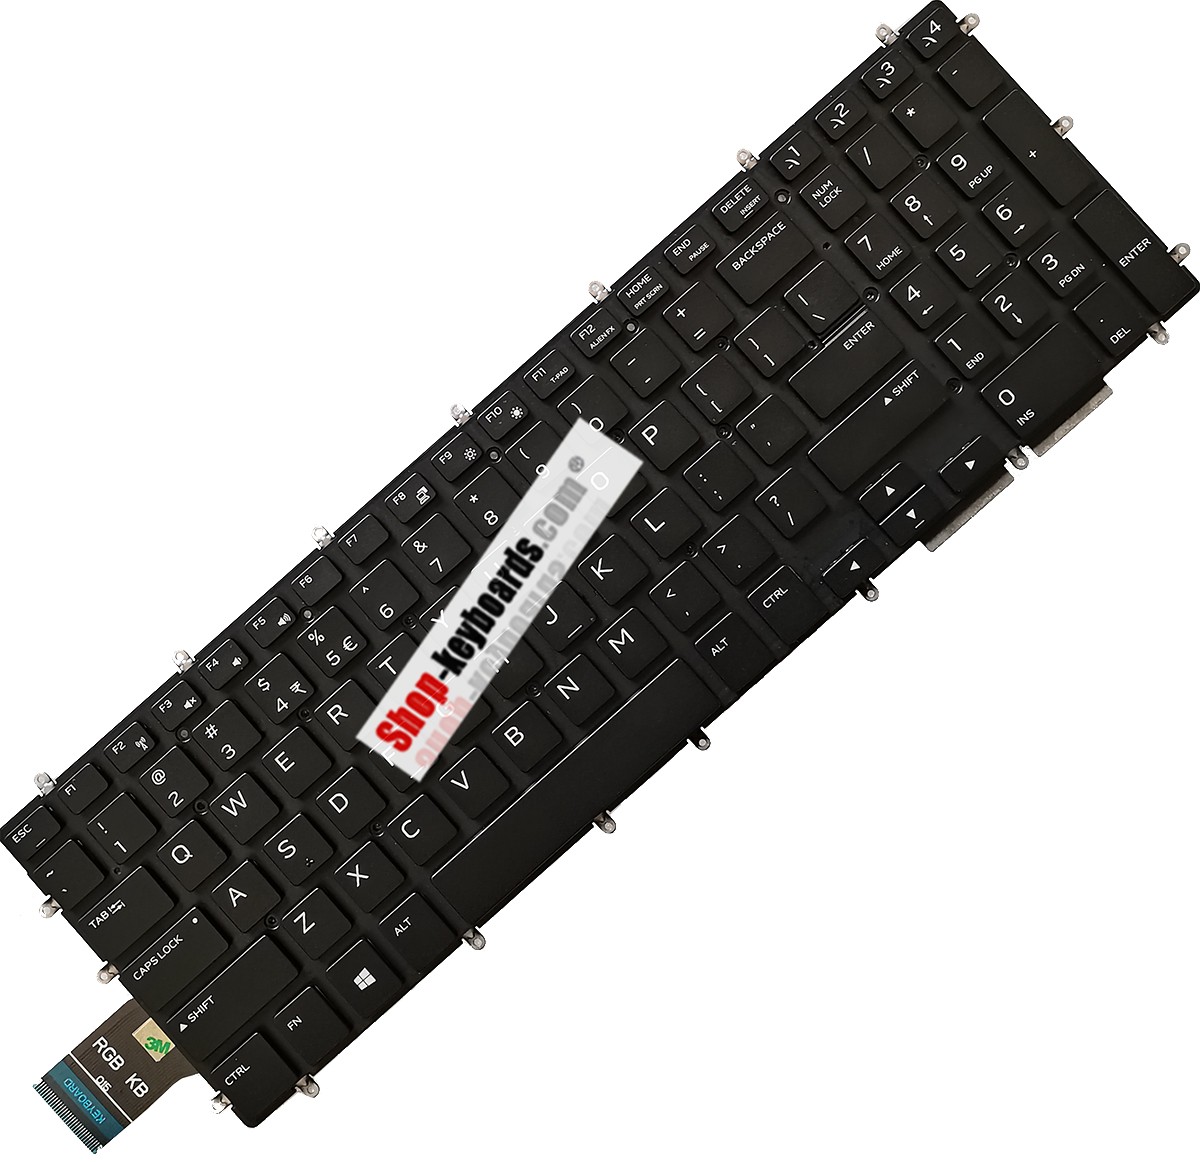 Dell 0K5Y90 Keyboard replacement